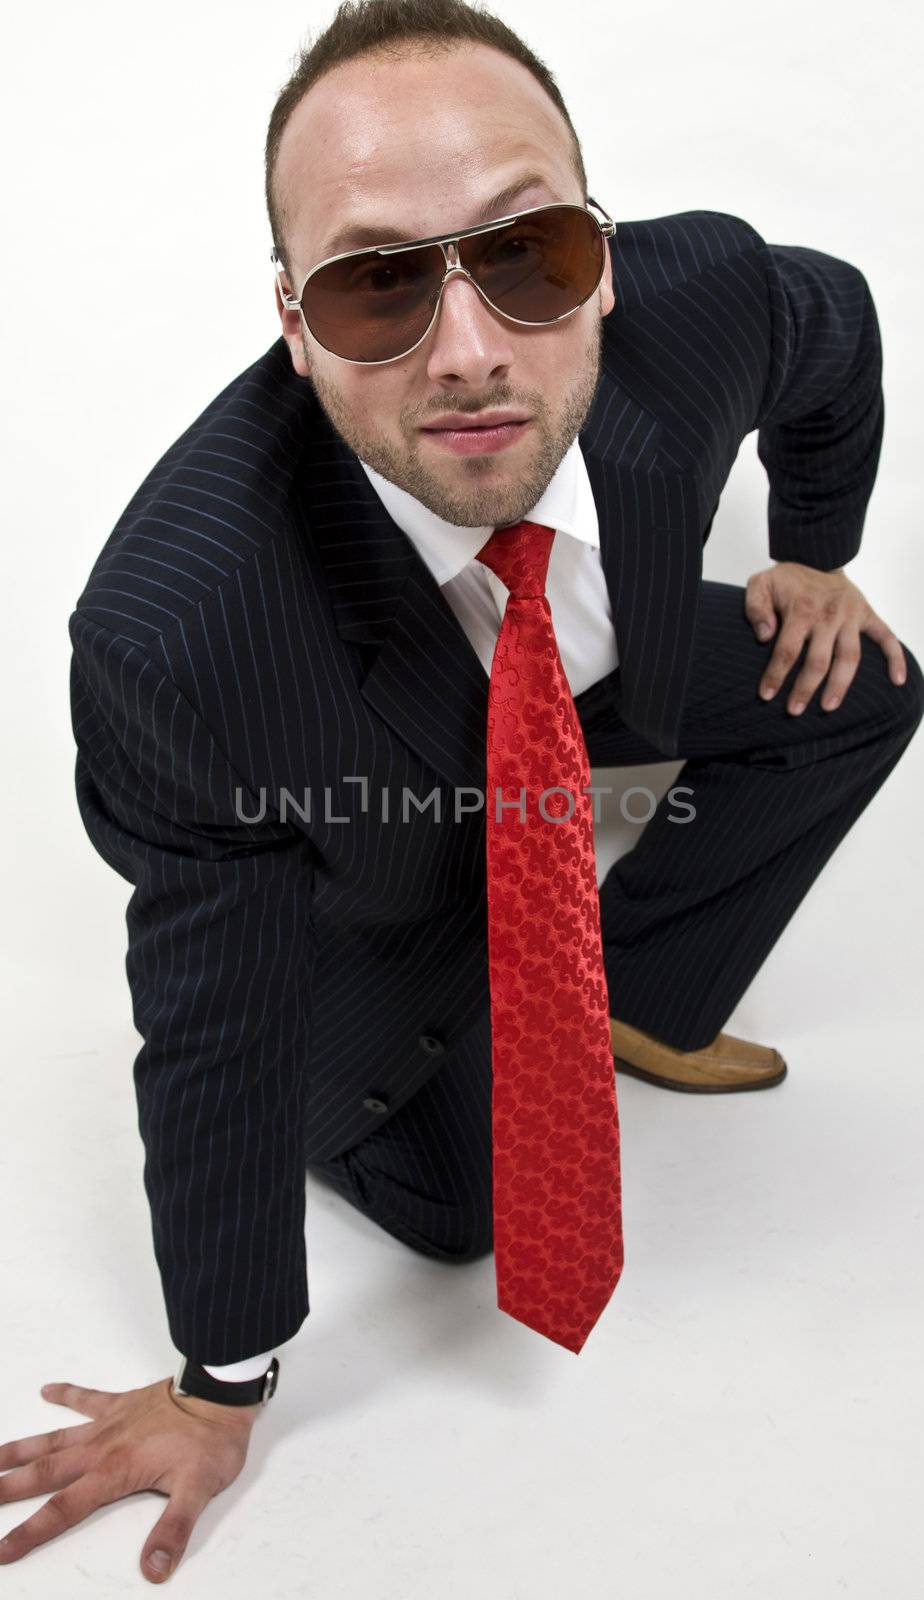 sitting man with eye wear on isolated background
